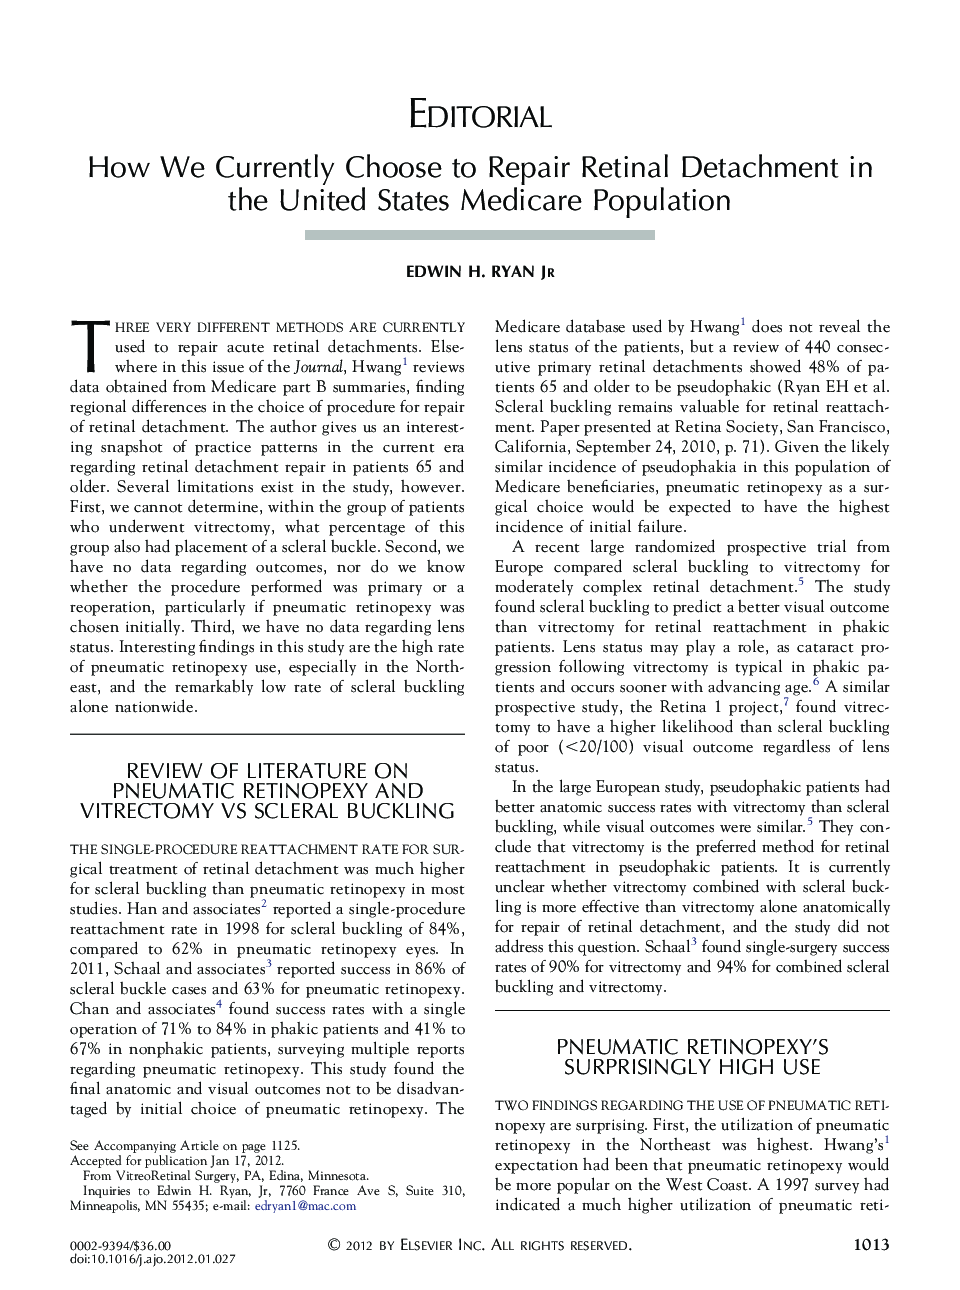 How We Currently Choose to Repair Retinal Detachment in the United States Medicare Population